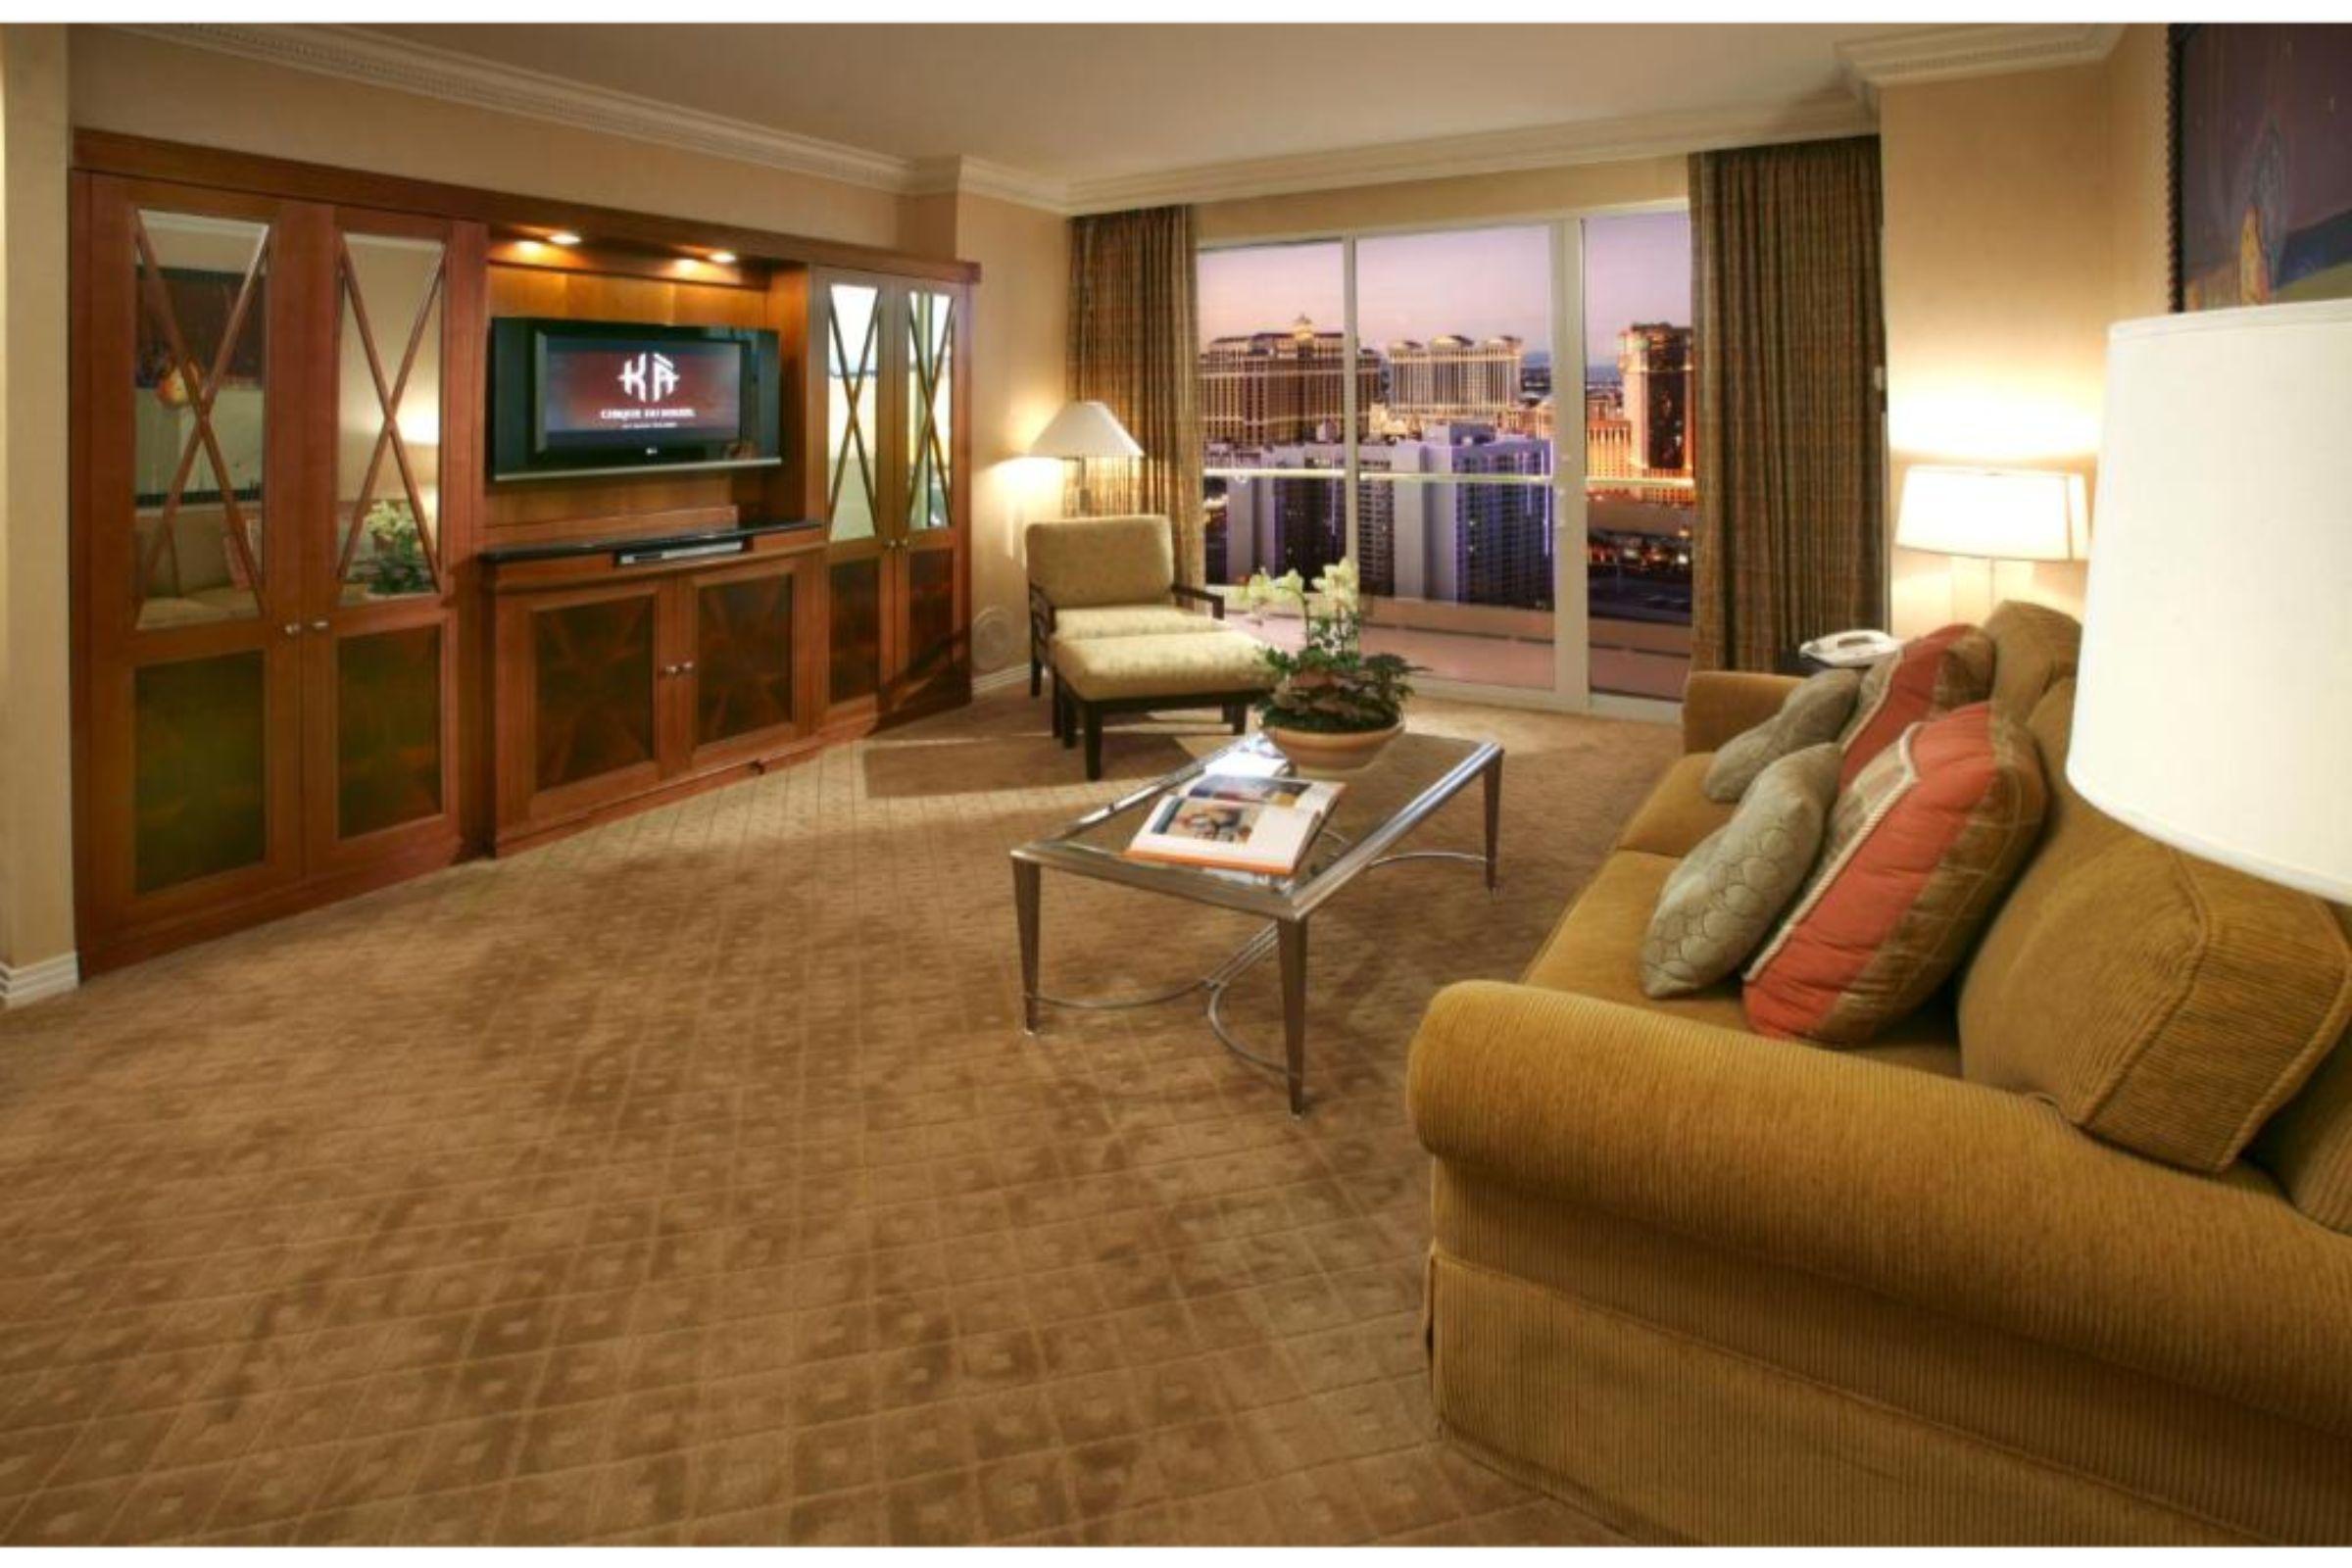 The Signature At Mgm Grand - All Suites Las Vegas Room photo